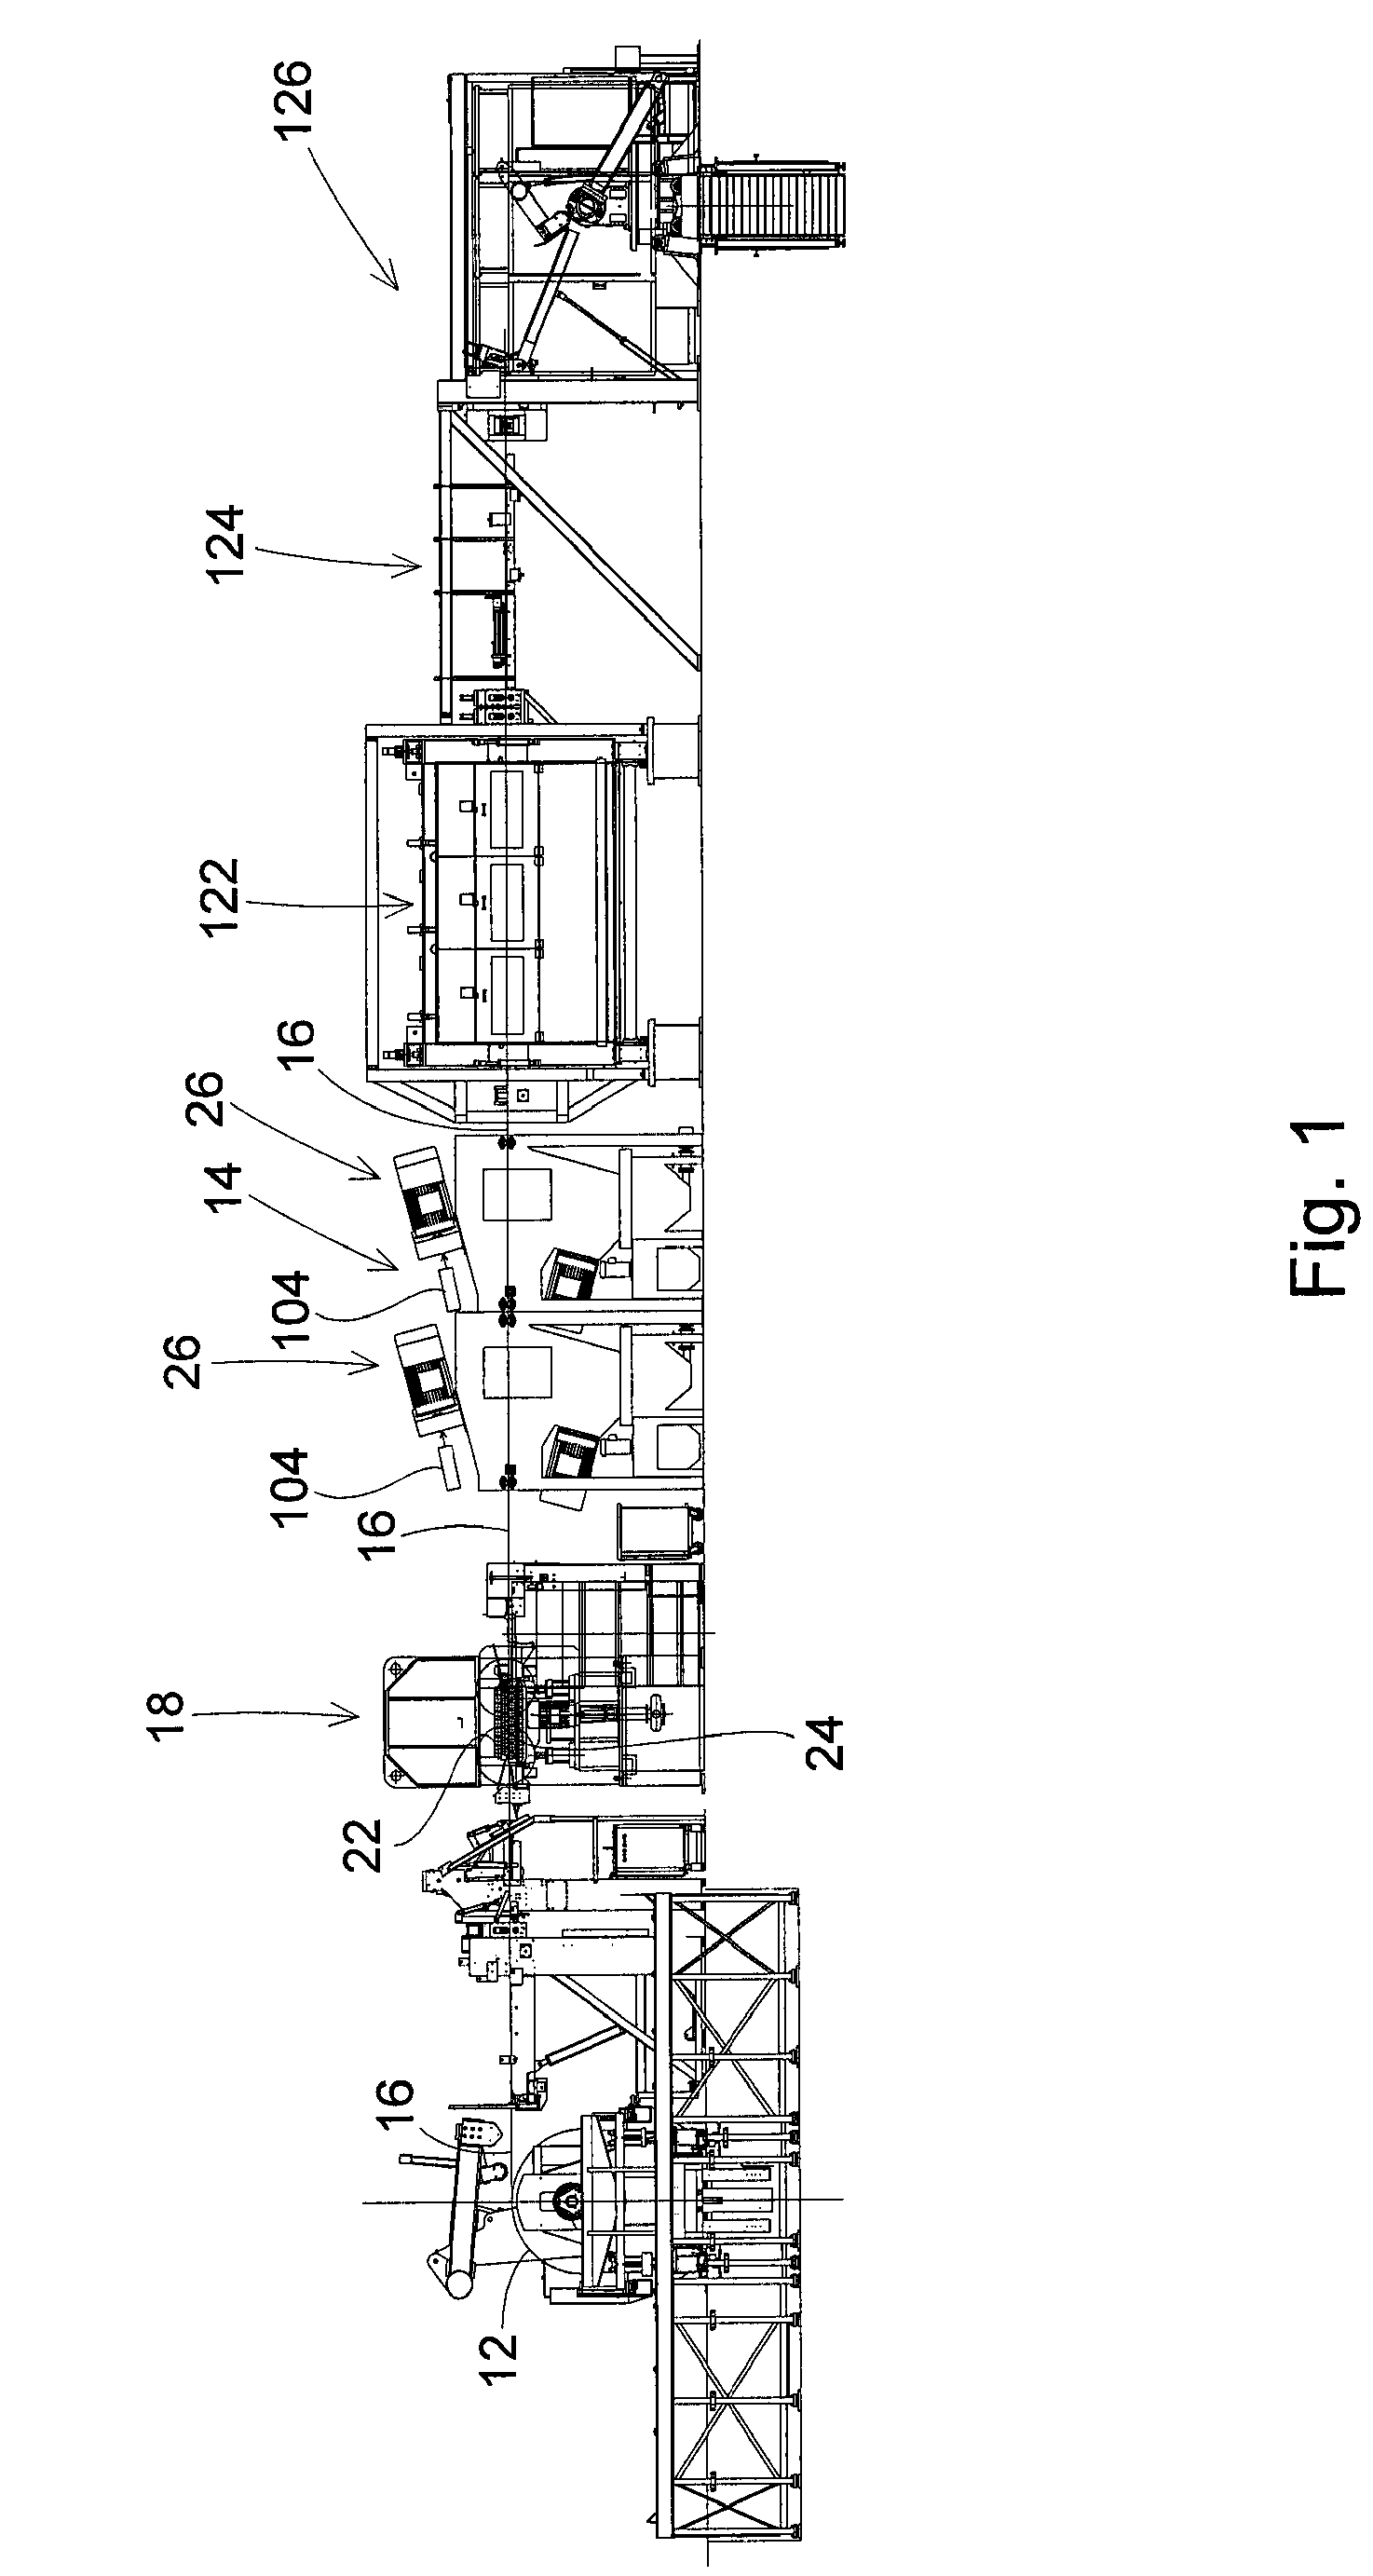 Slurry blasting apparatus for removing scale from sheet metal